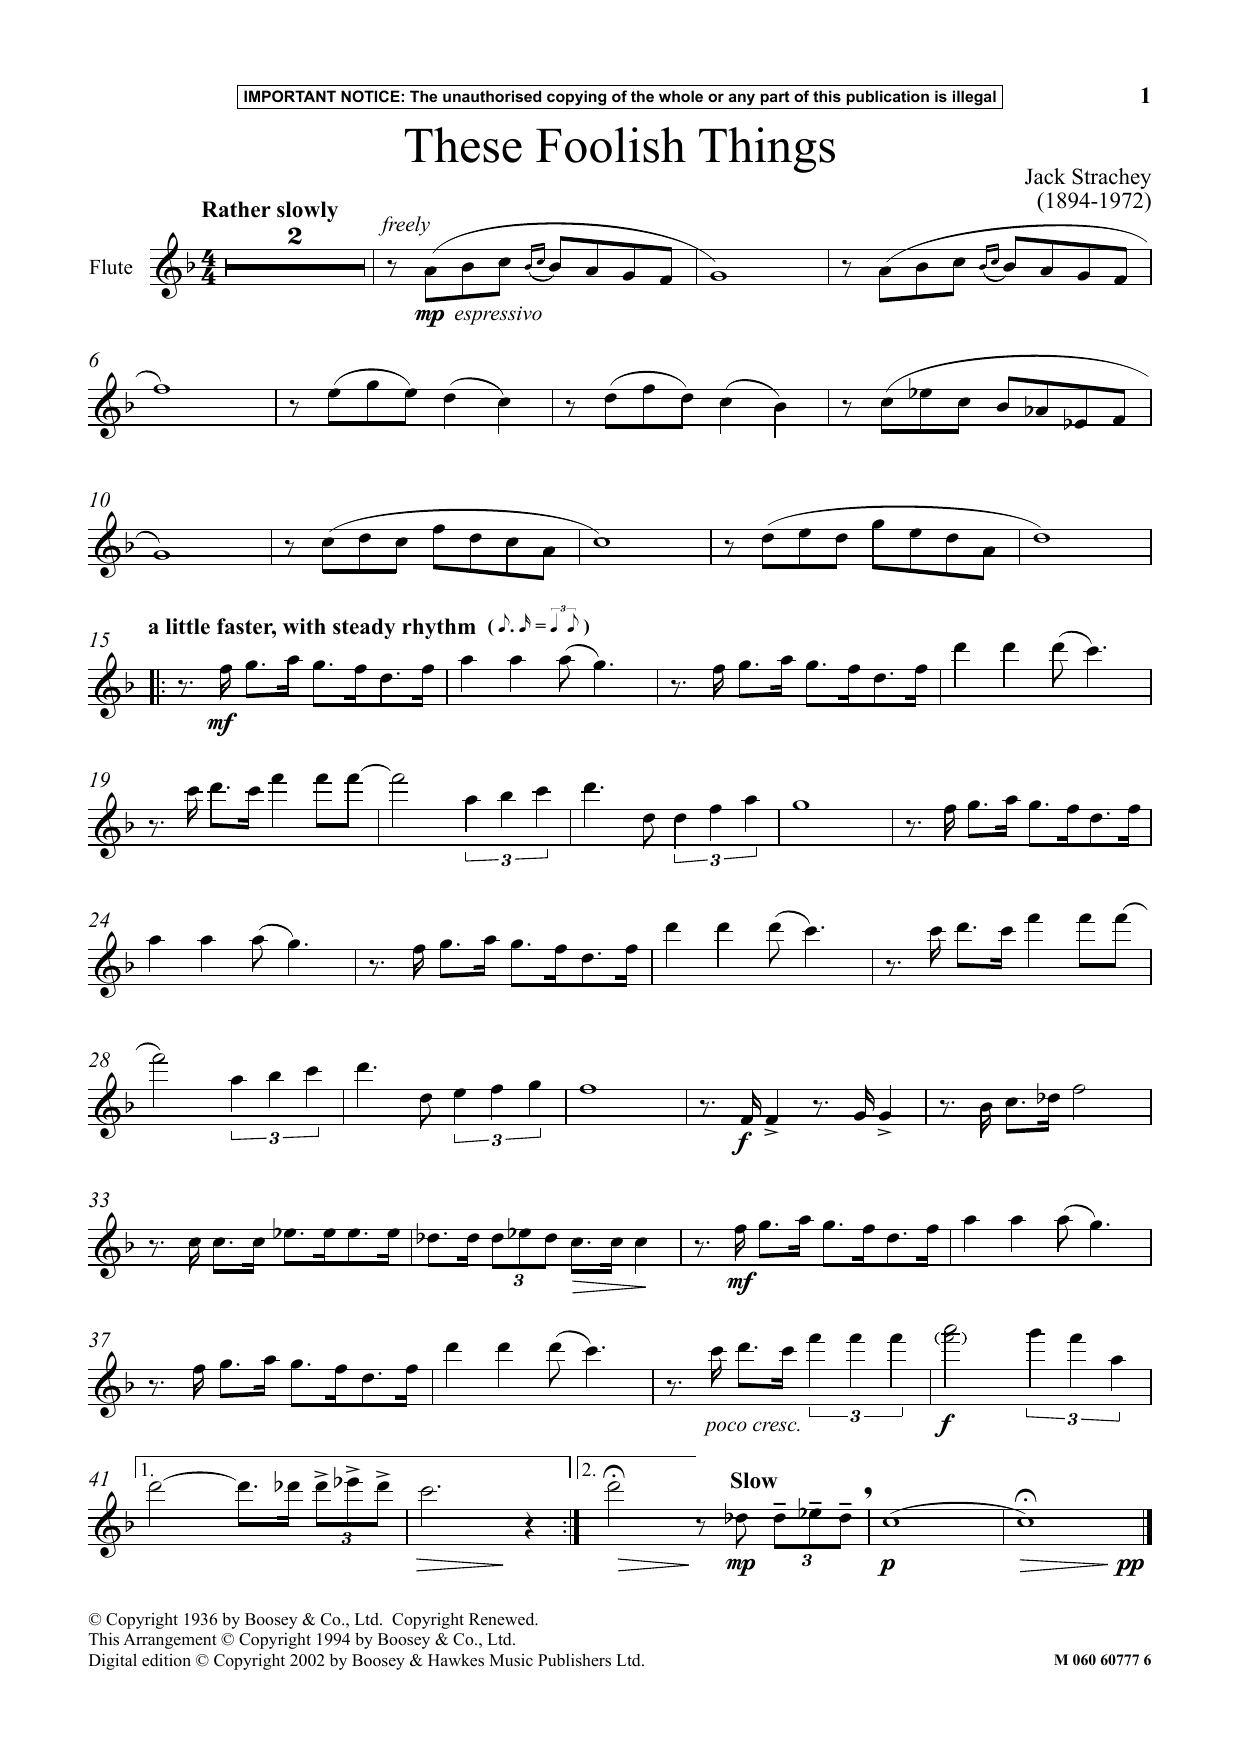 Download Jack Strachey These Foolish Things Sheet Music